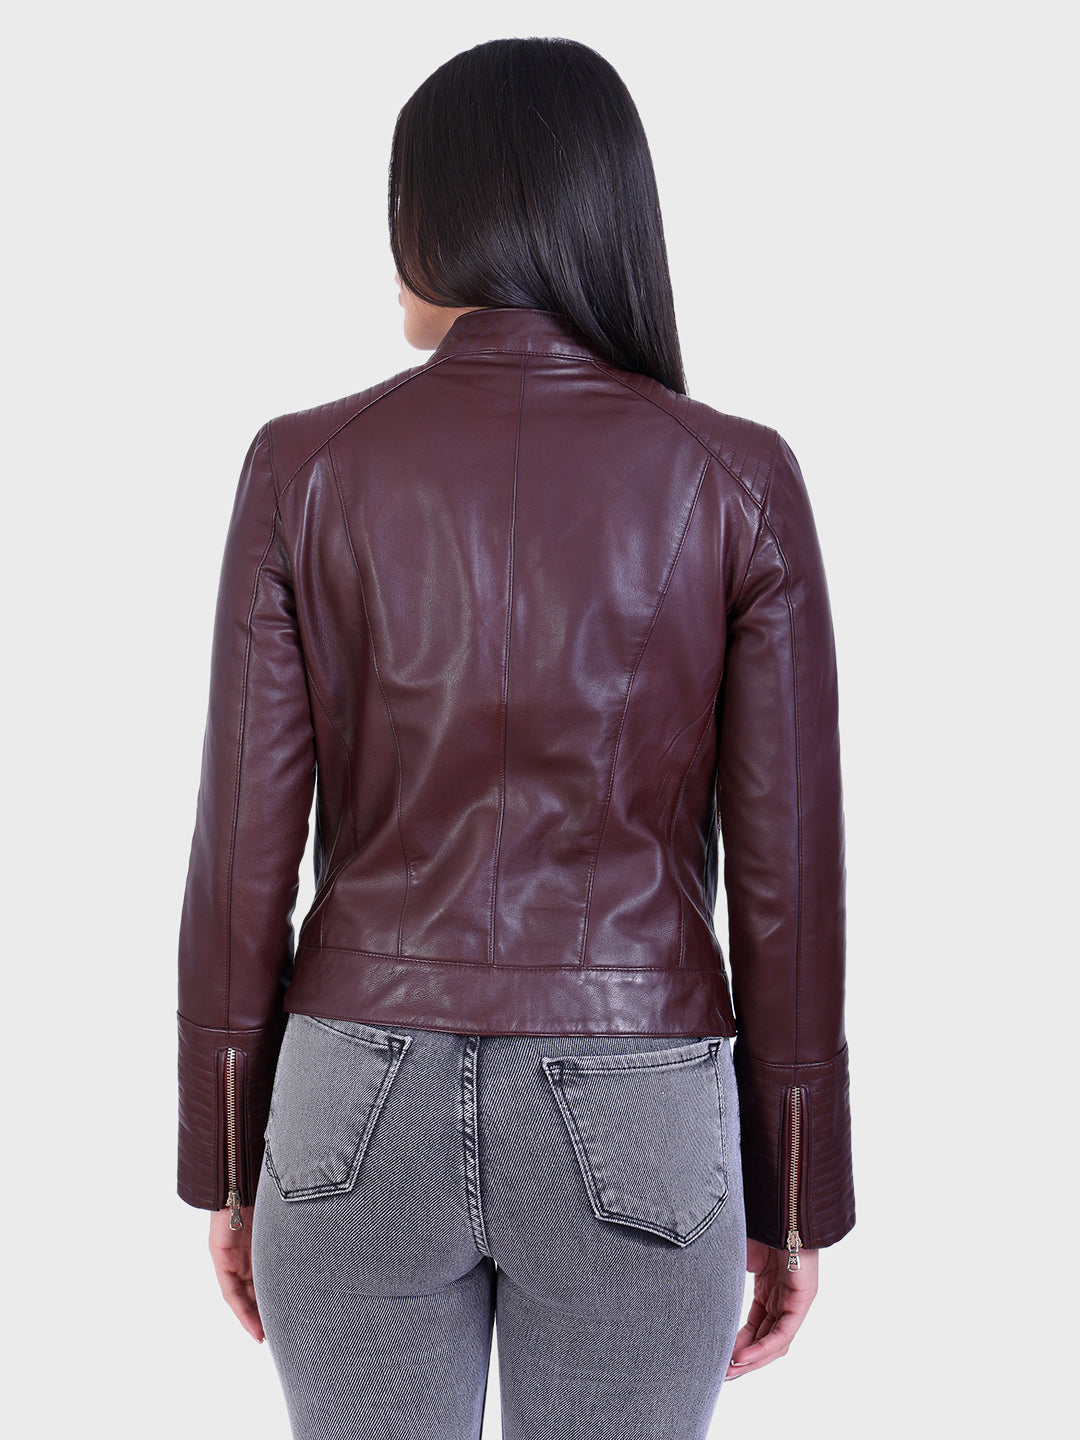 Justanned Burgundy Leather Jacket